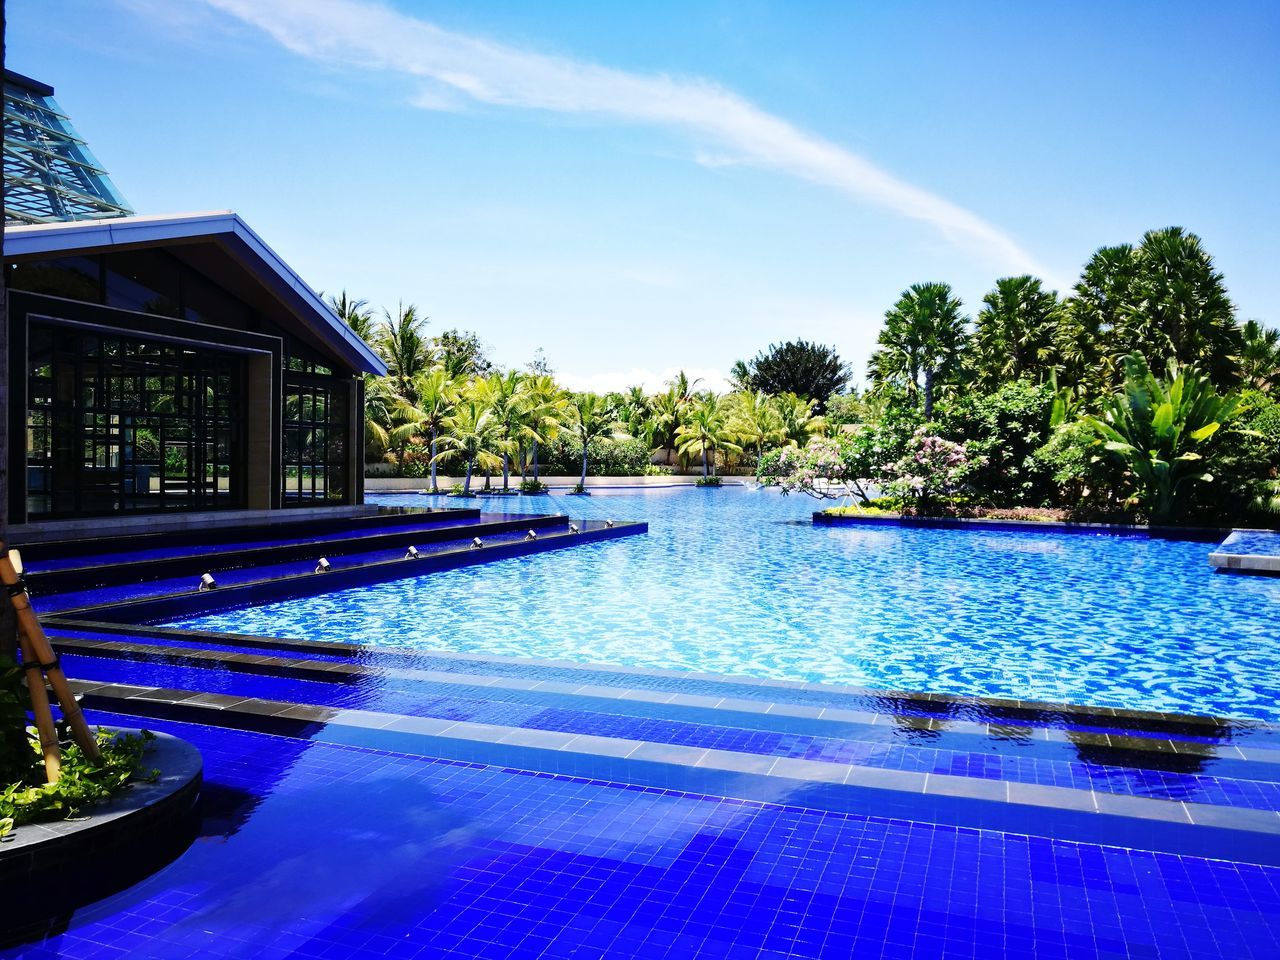 swimming pool, water, tree, blue, no people, architecture, luxury, outdoors, day, sky, sunlight, growth, nature, beauty in nature